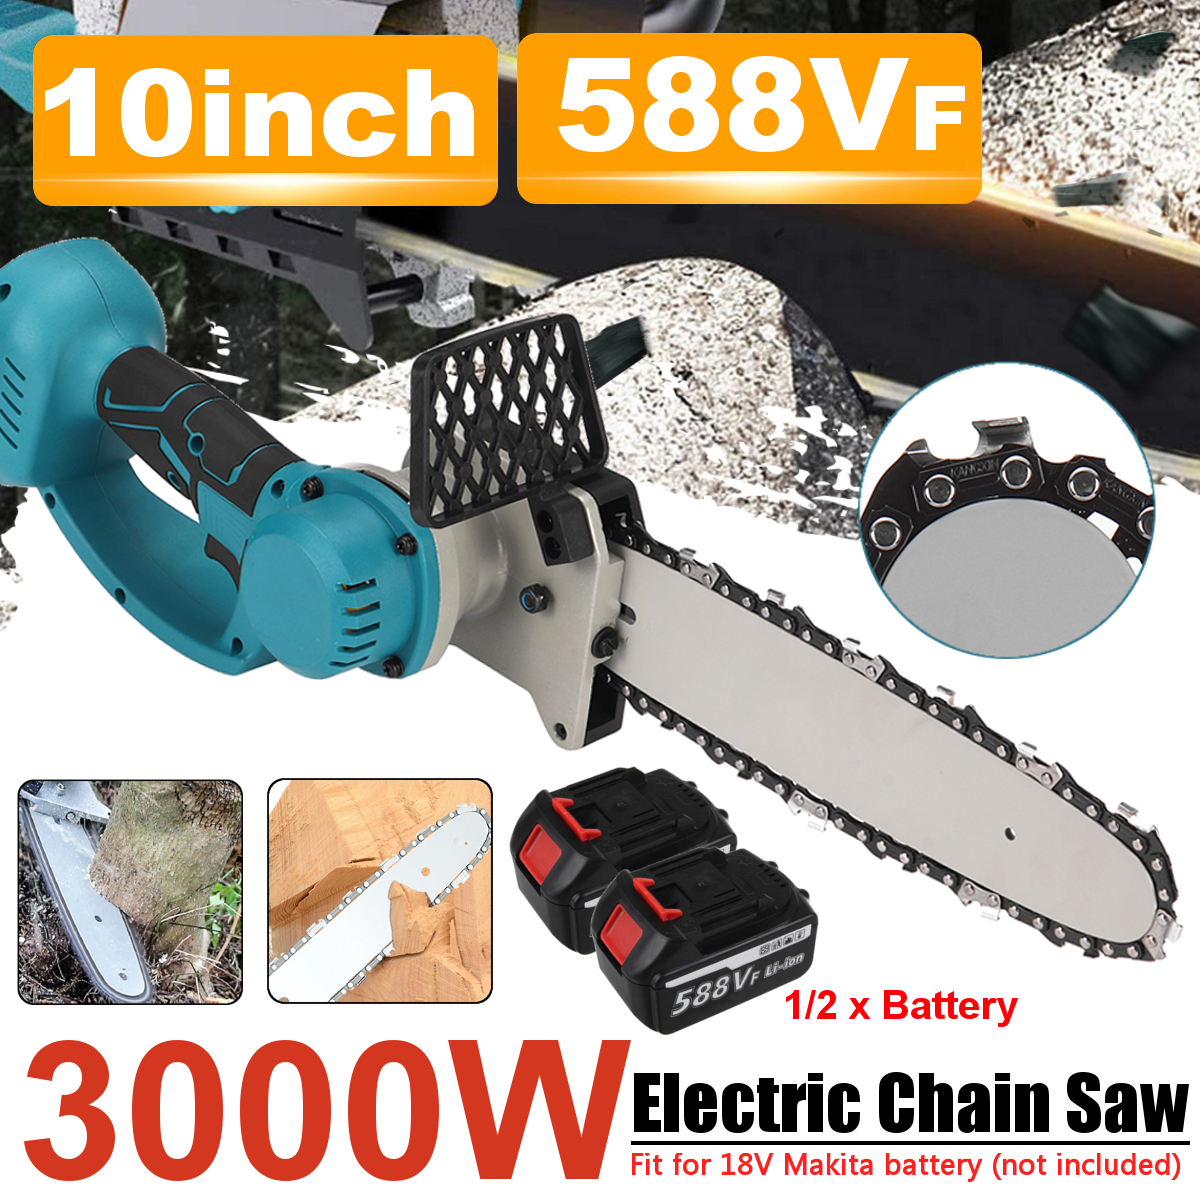 10-Inch-588VF-Electric-Chain-Saw-Woodworking-Tool-Portable-Chainsaws-w-1pc2pcs-Battery-For-Cutting-P-1823938-1